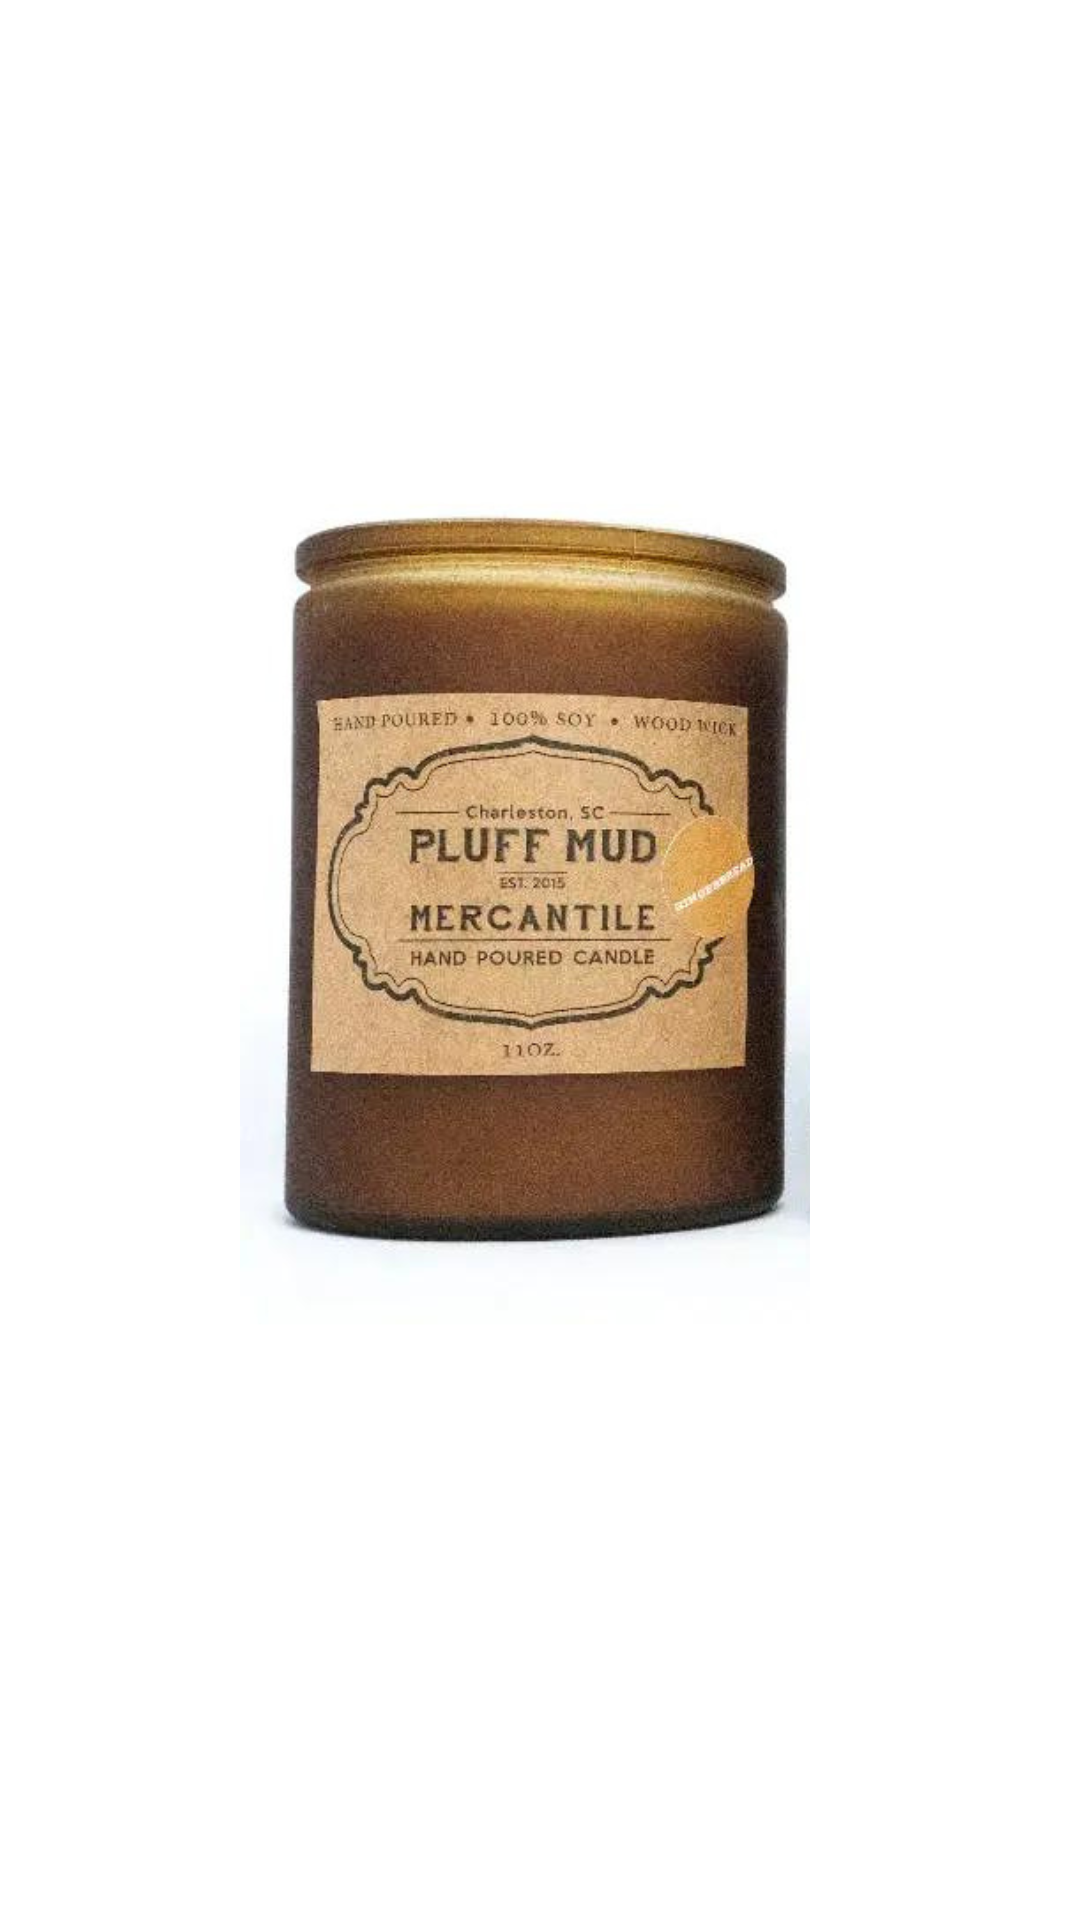 Marsh Grass Hand Poured Soy Candle - Pluff Mud Mercantile